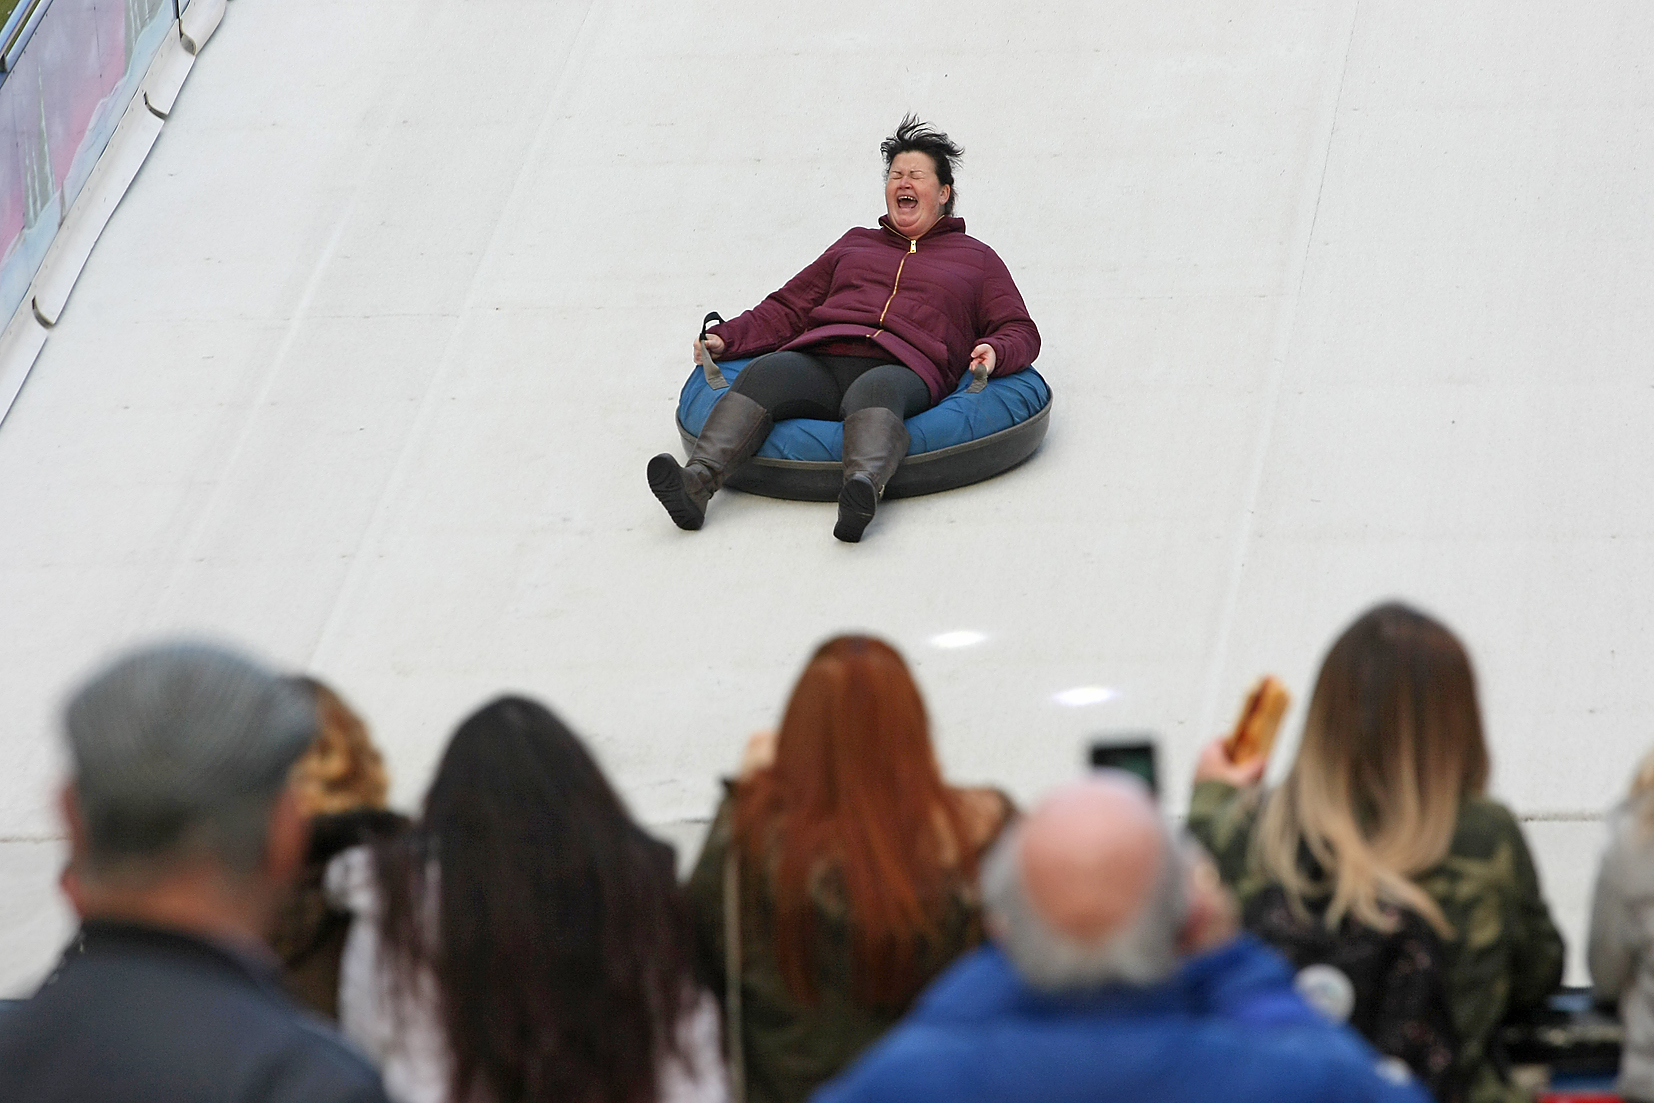 Marie-Claire Gok embraces the Snow Slide at Donegall Place.